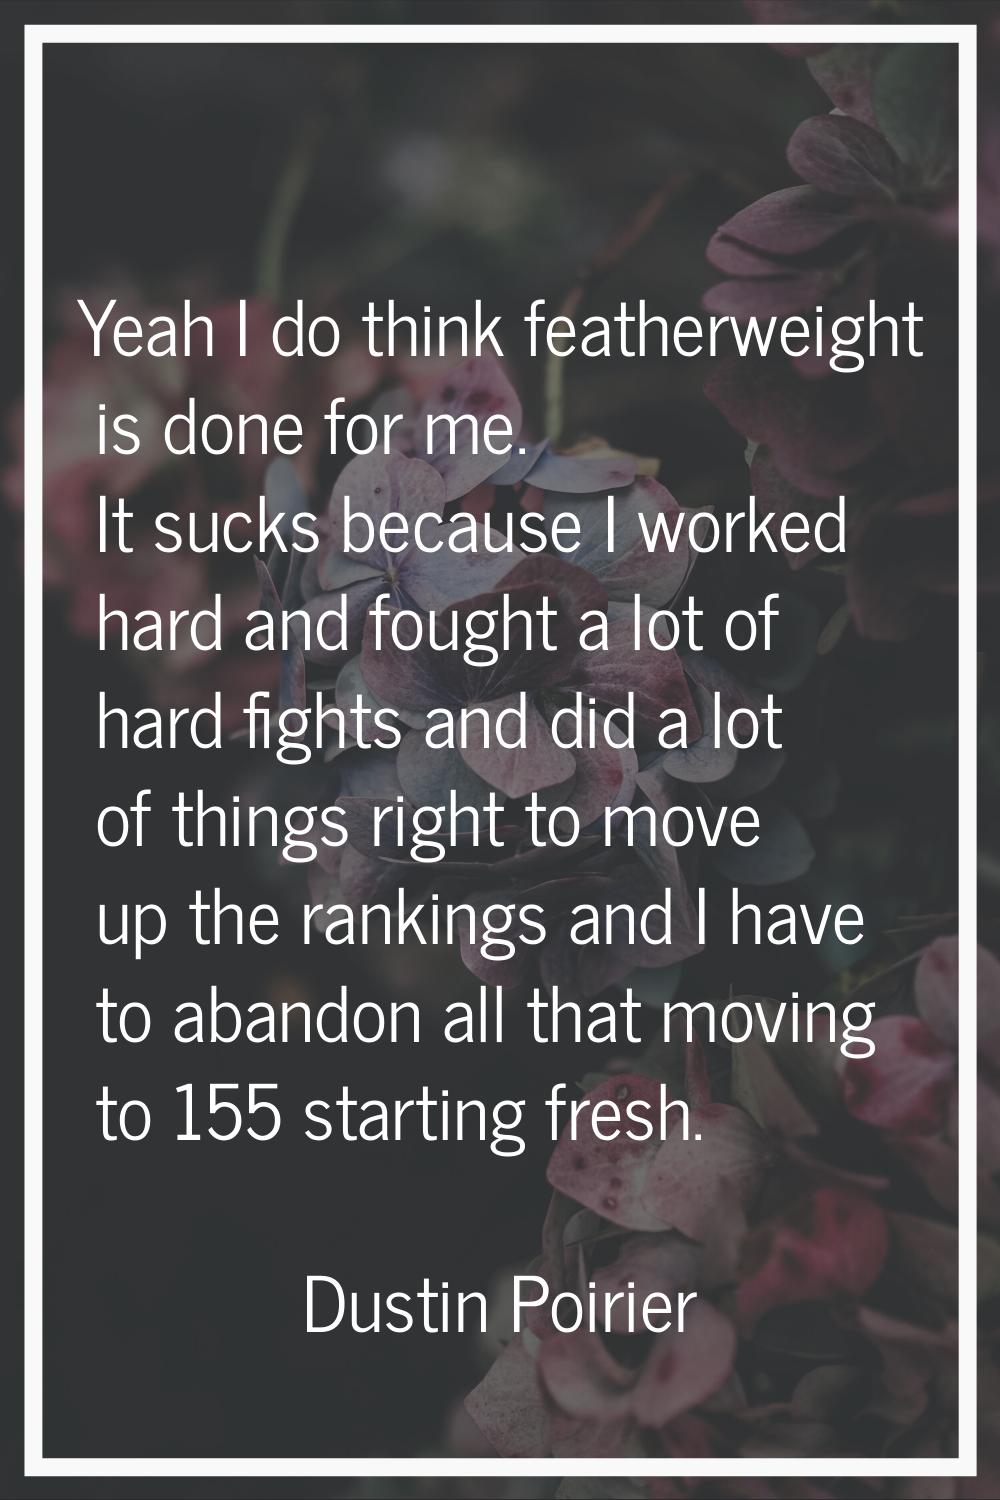 Yeah I do think featherweight is done for me. It sucks because I worked hard and fought a lot of ha